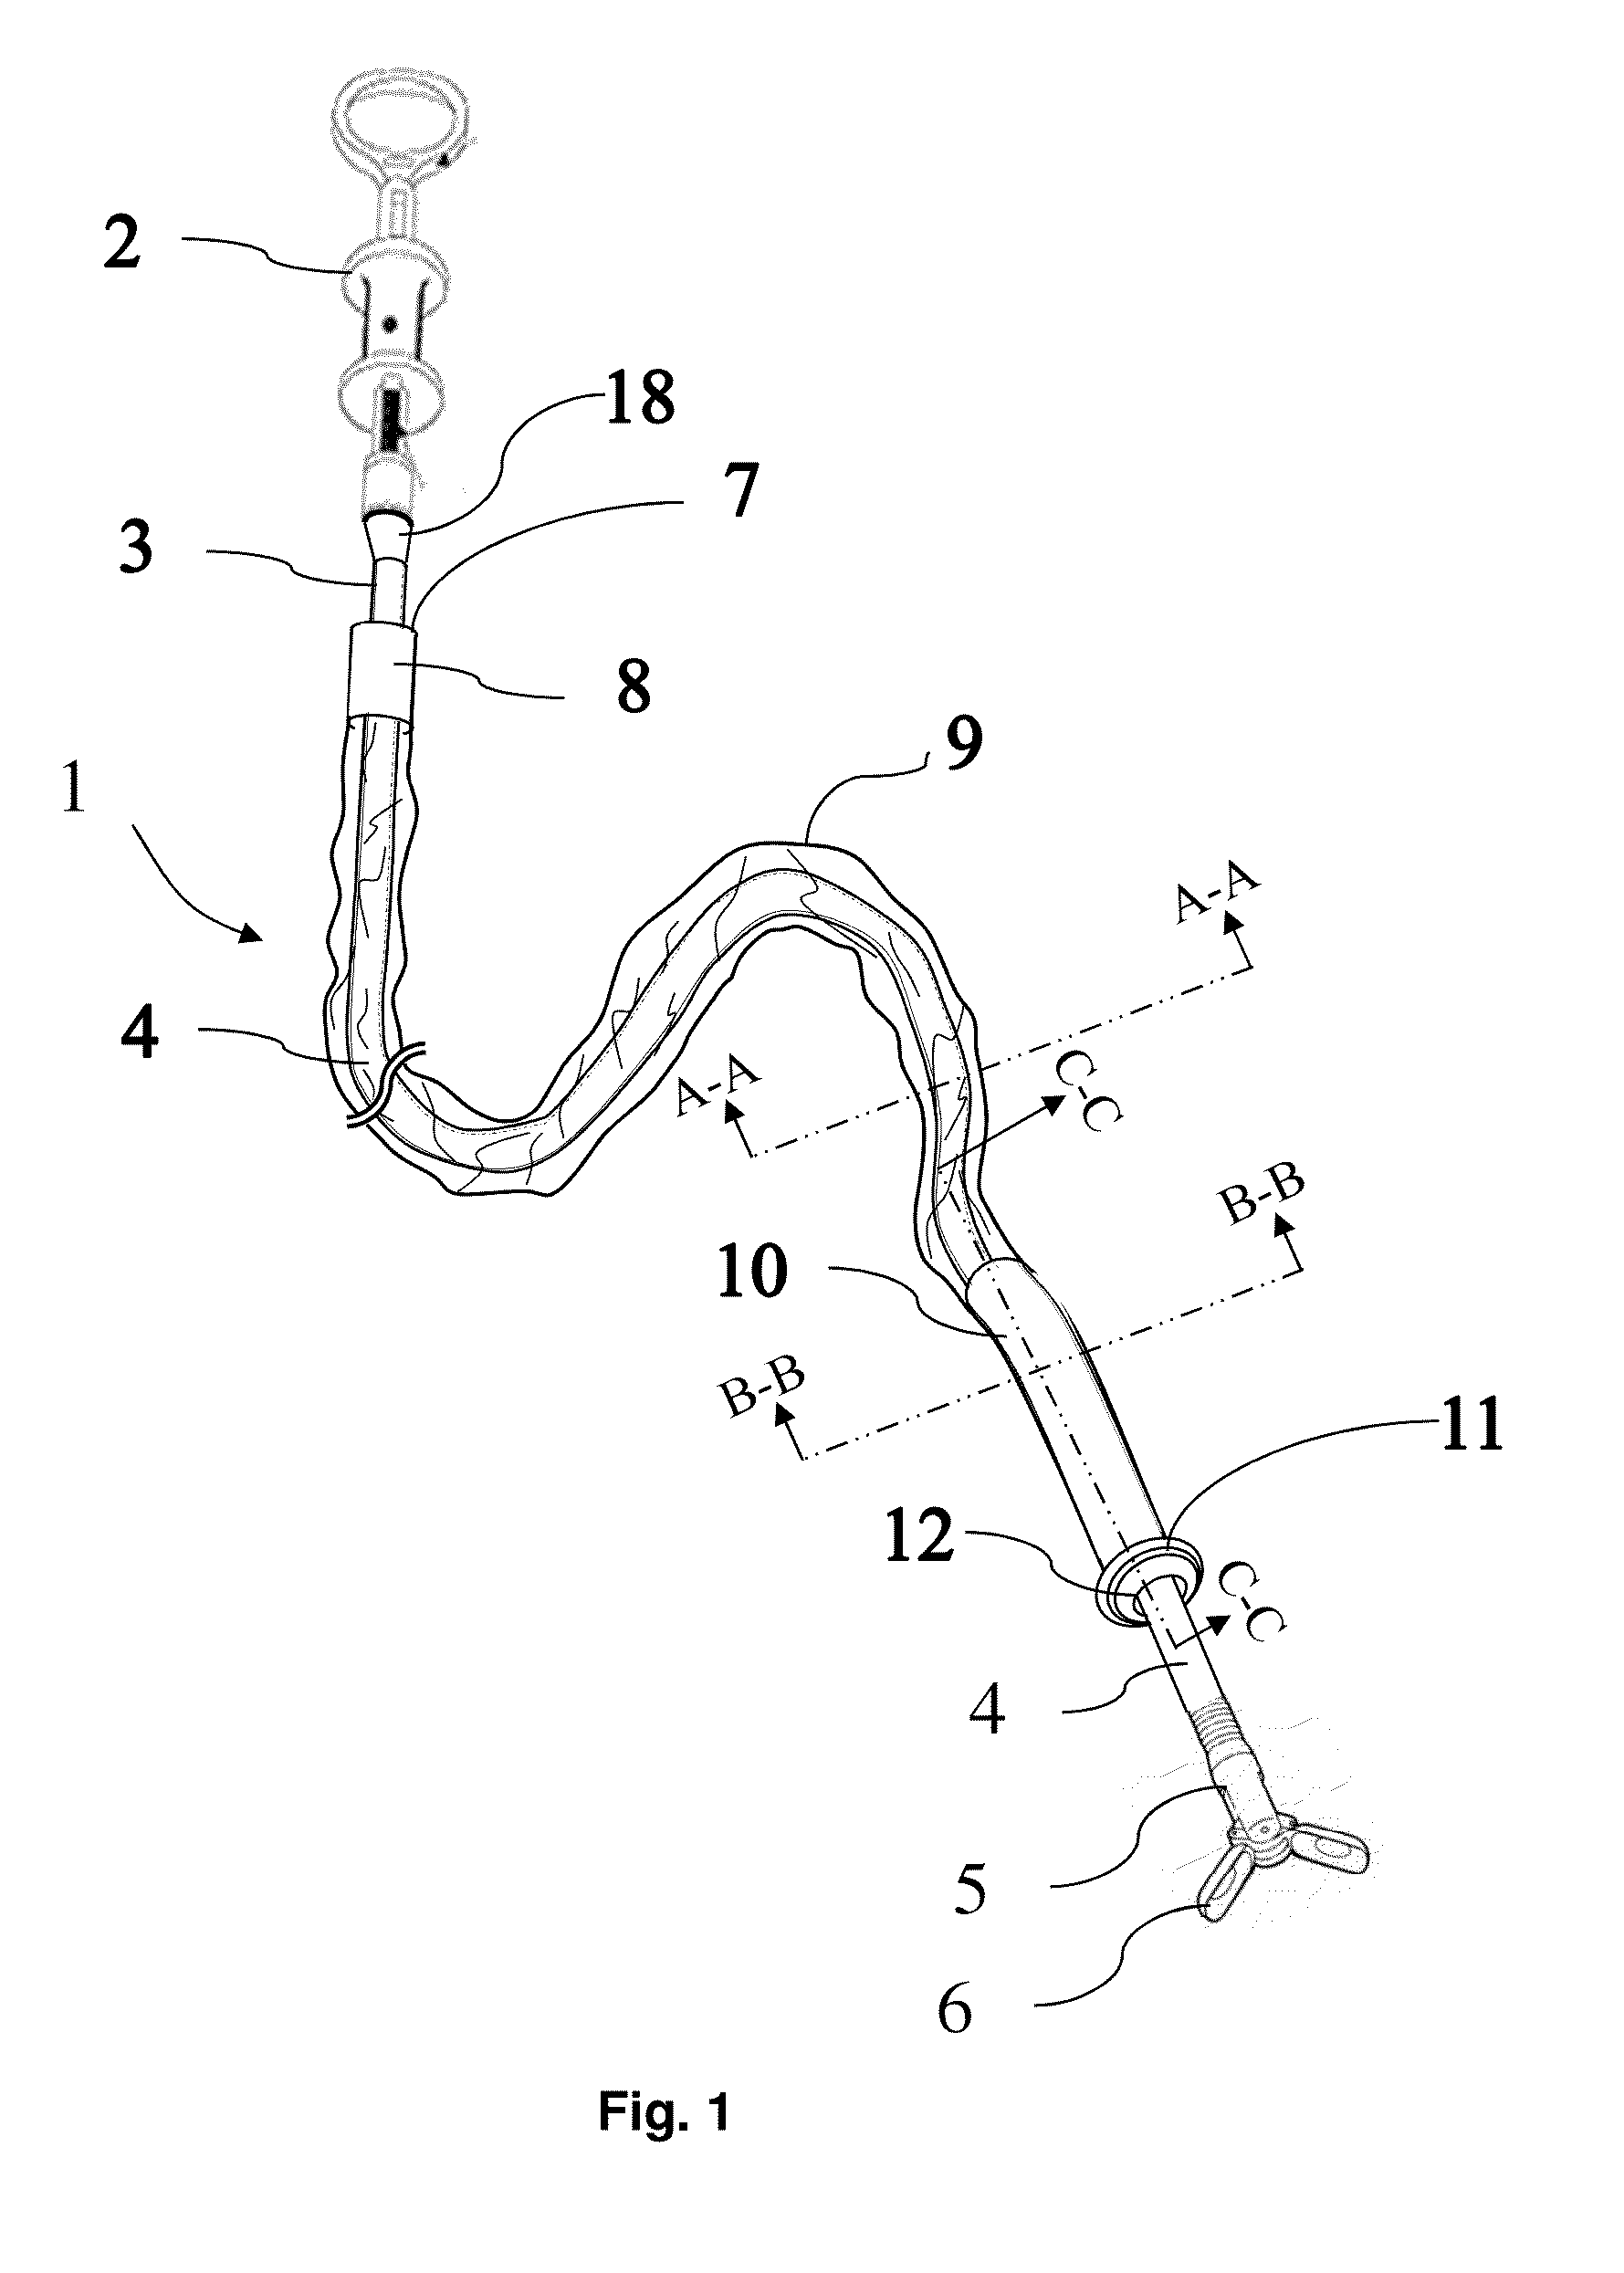 Method and Device for Improved Hygiene During using Endoscopic accessory tools